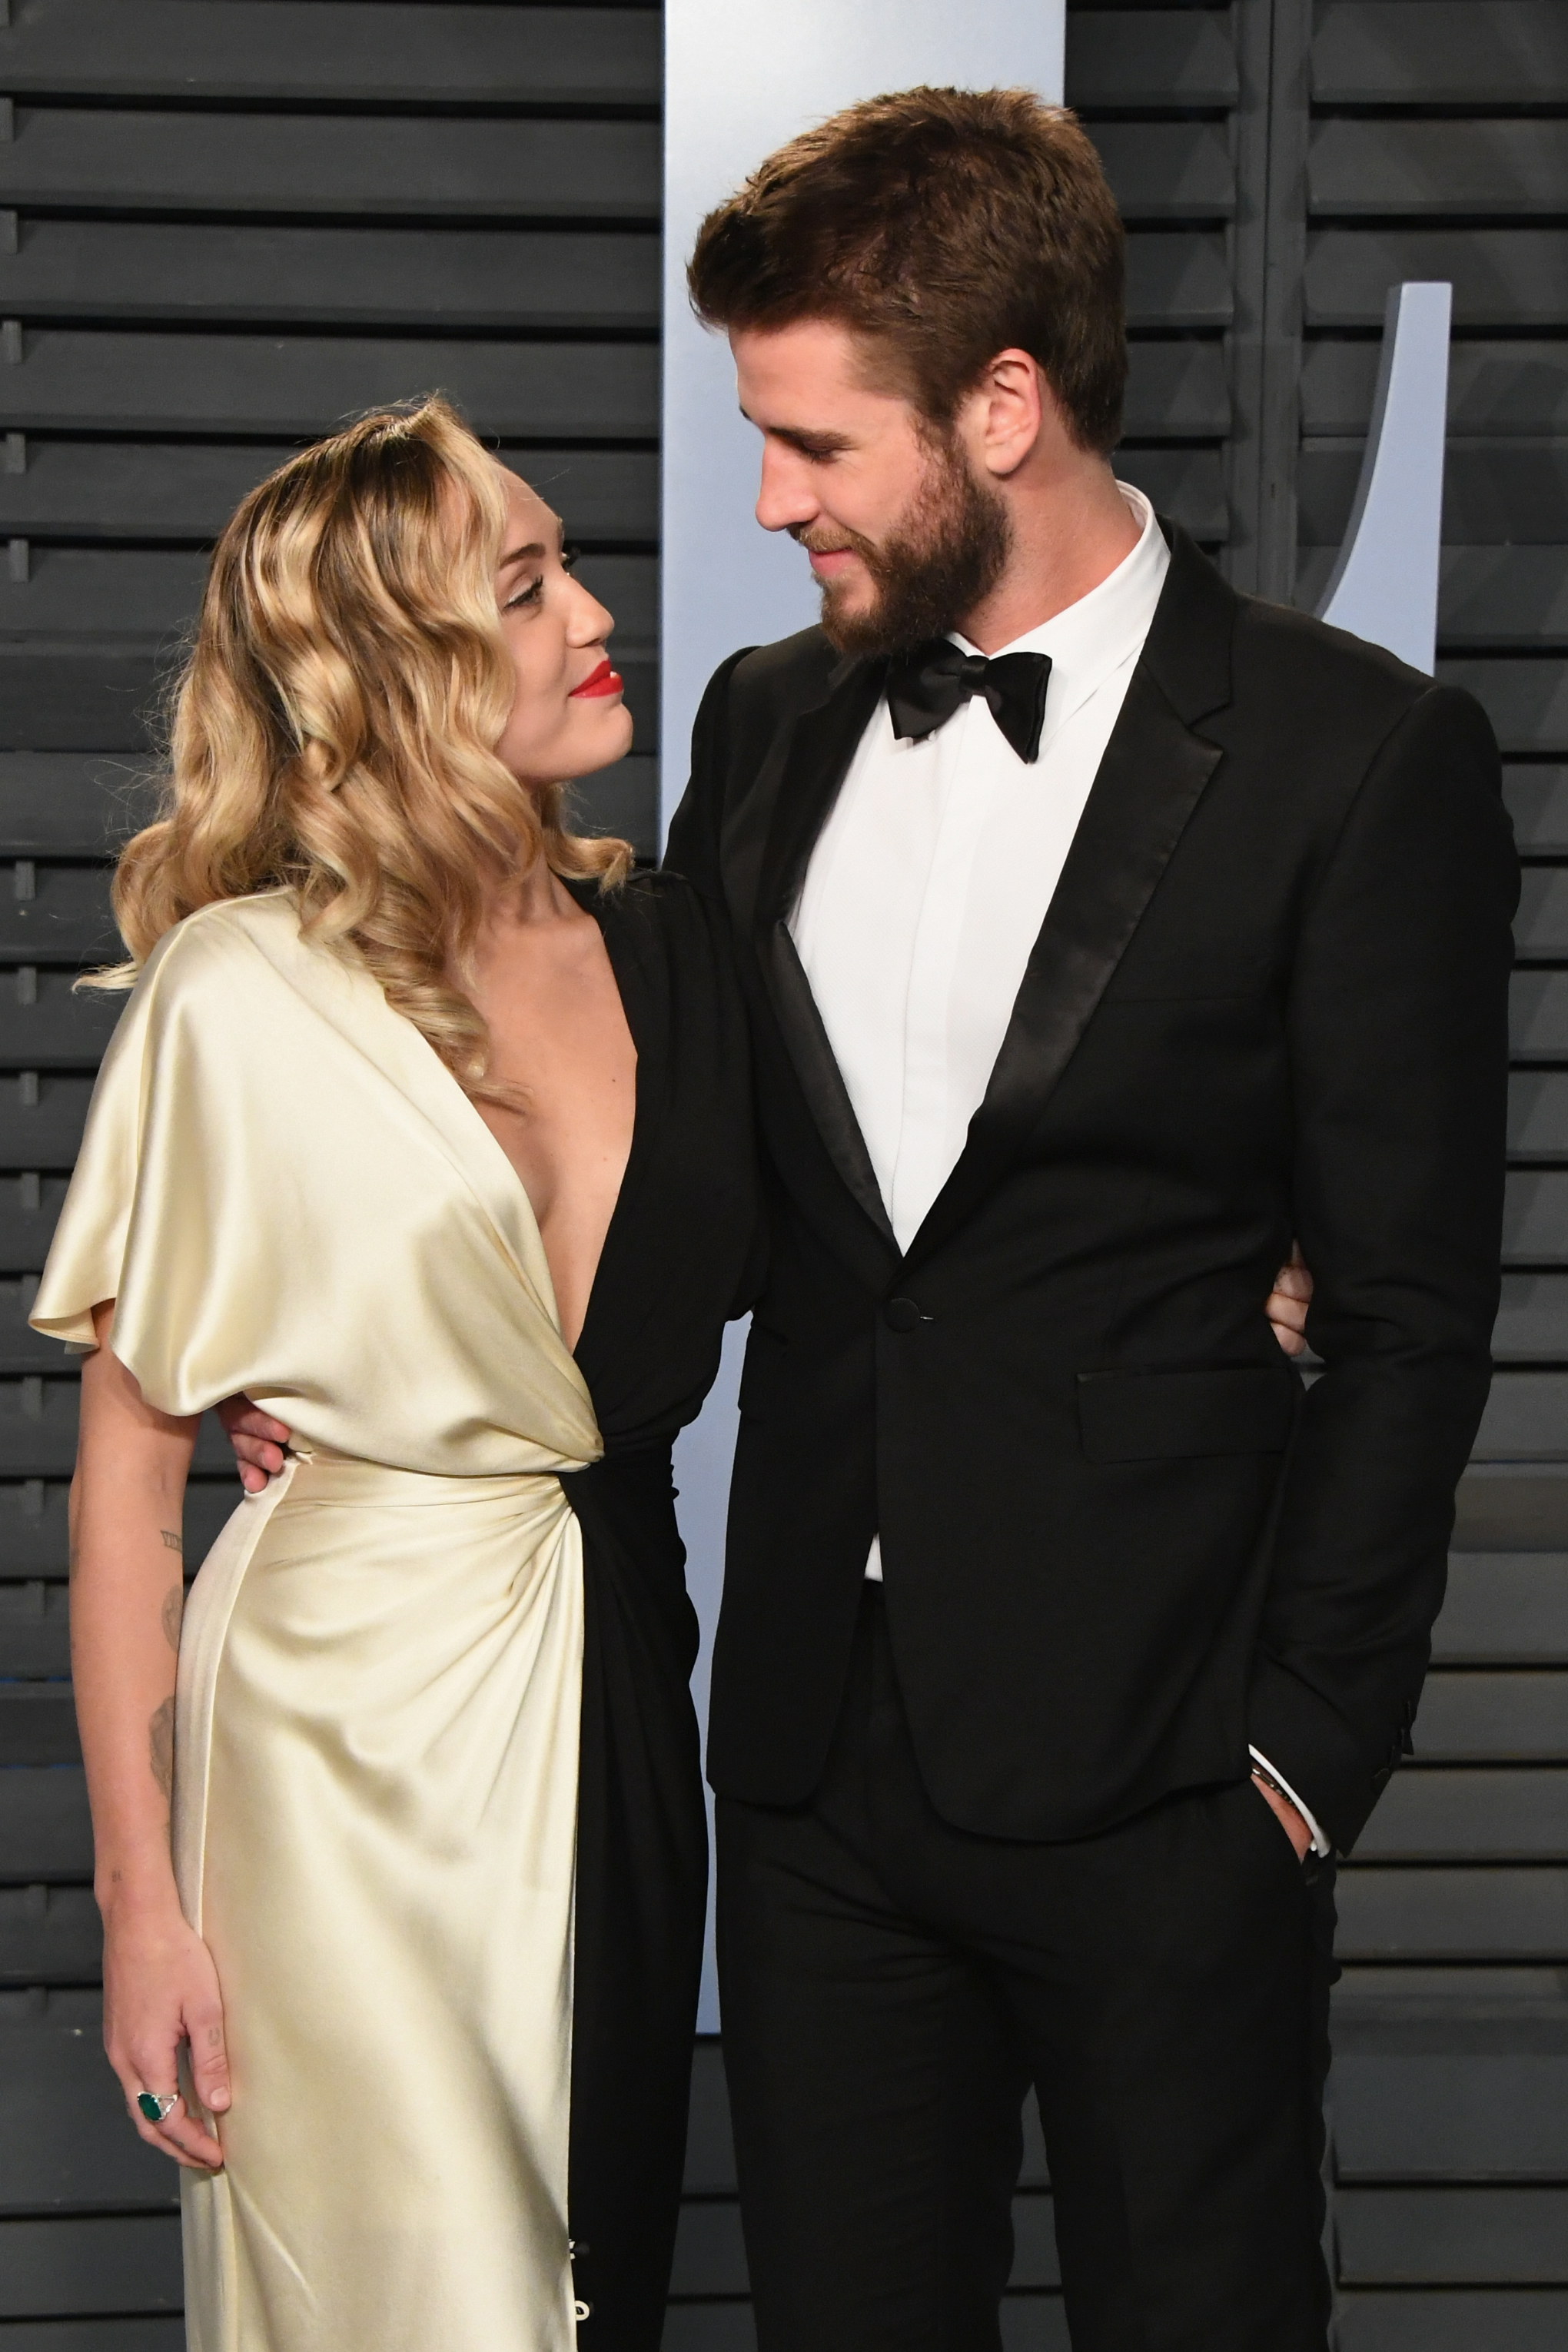 Miley Cyrus and Liam Hemsworth look at each other lovingly as they stand on the red carpet